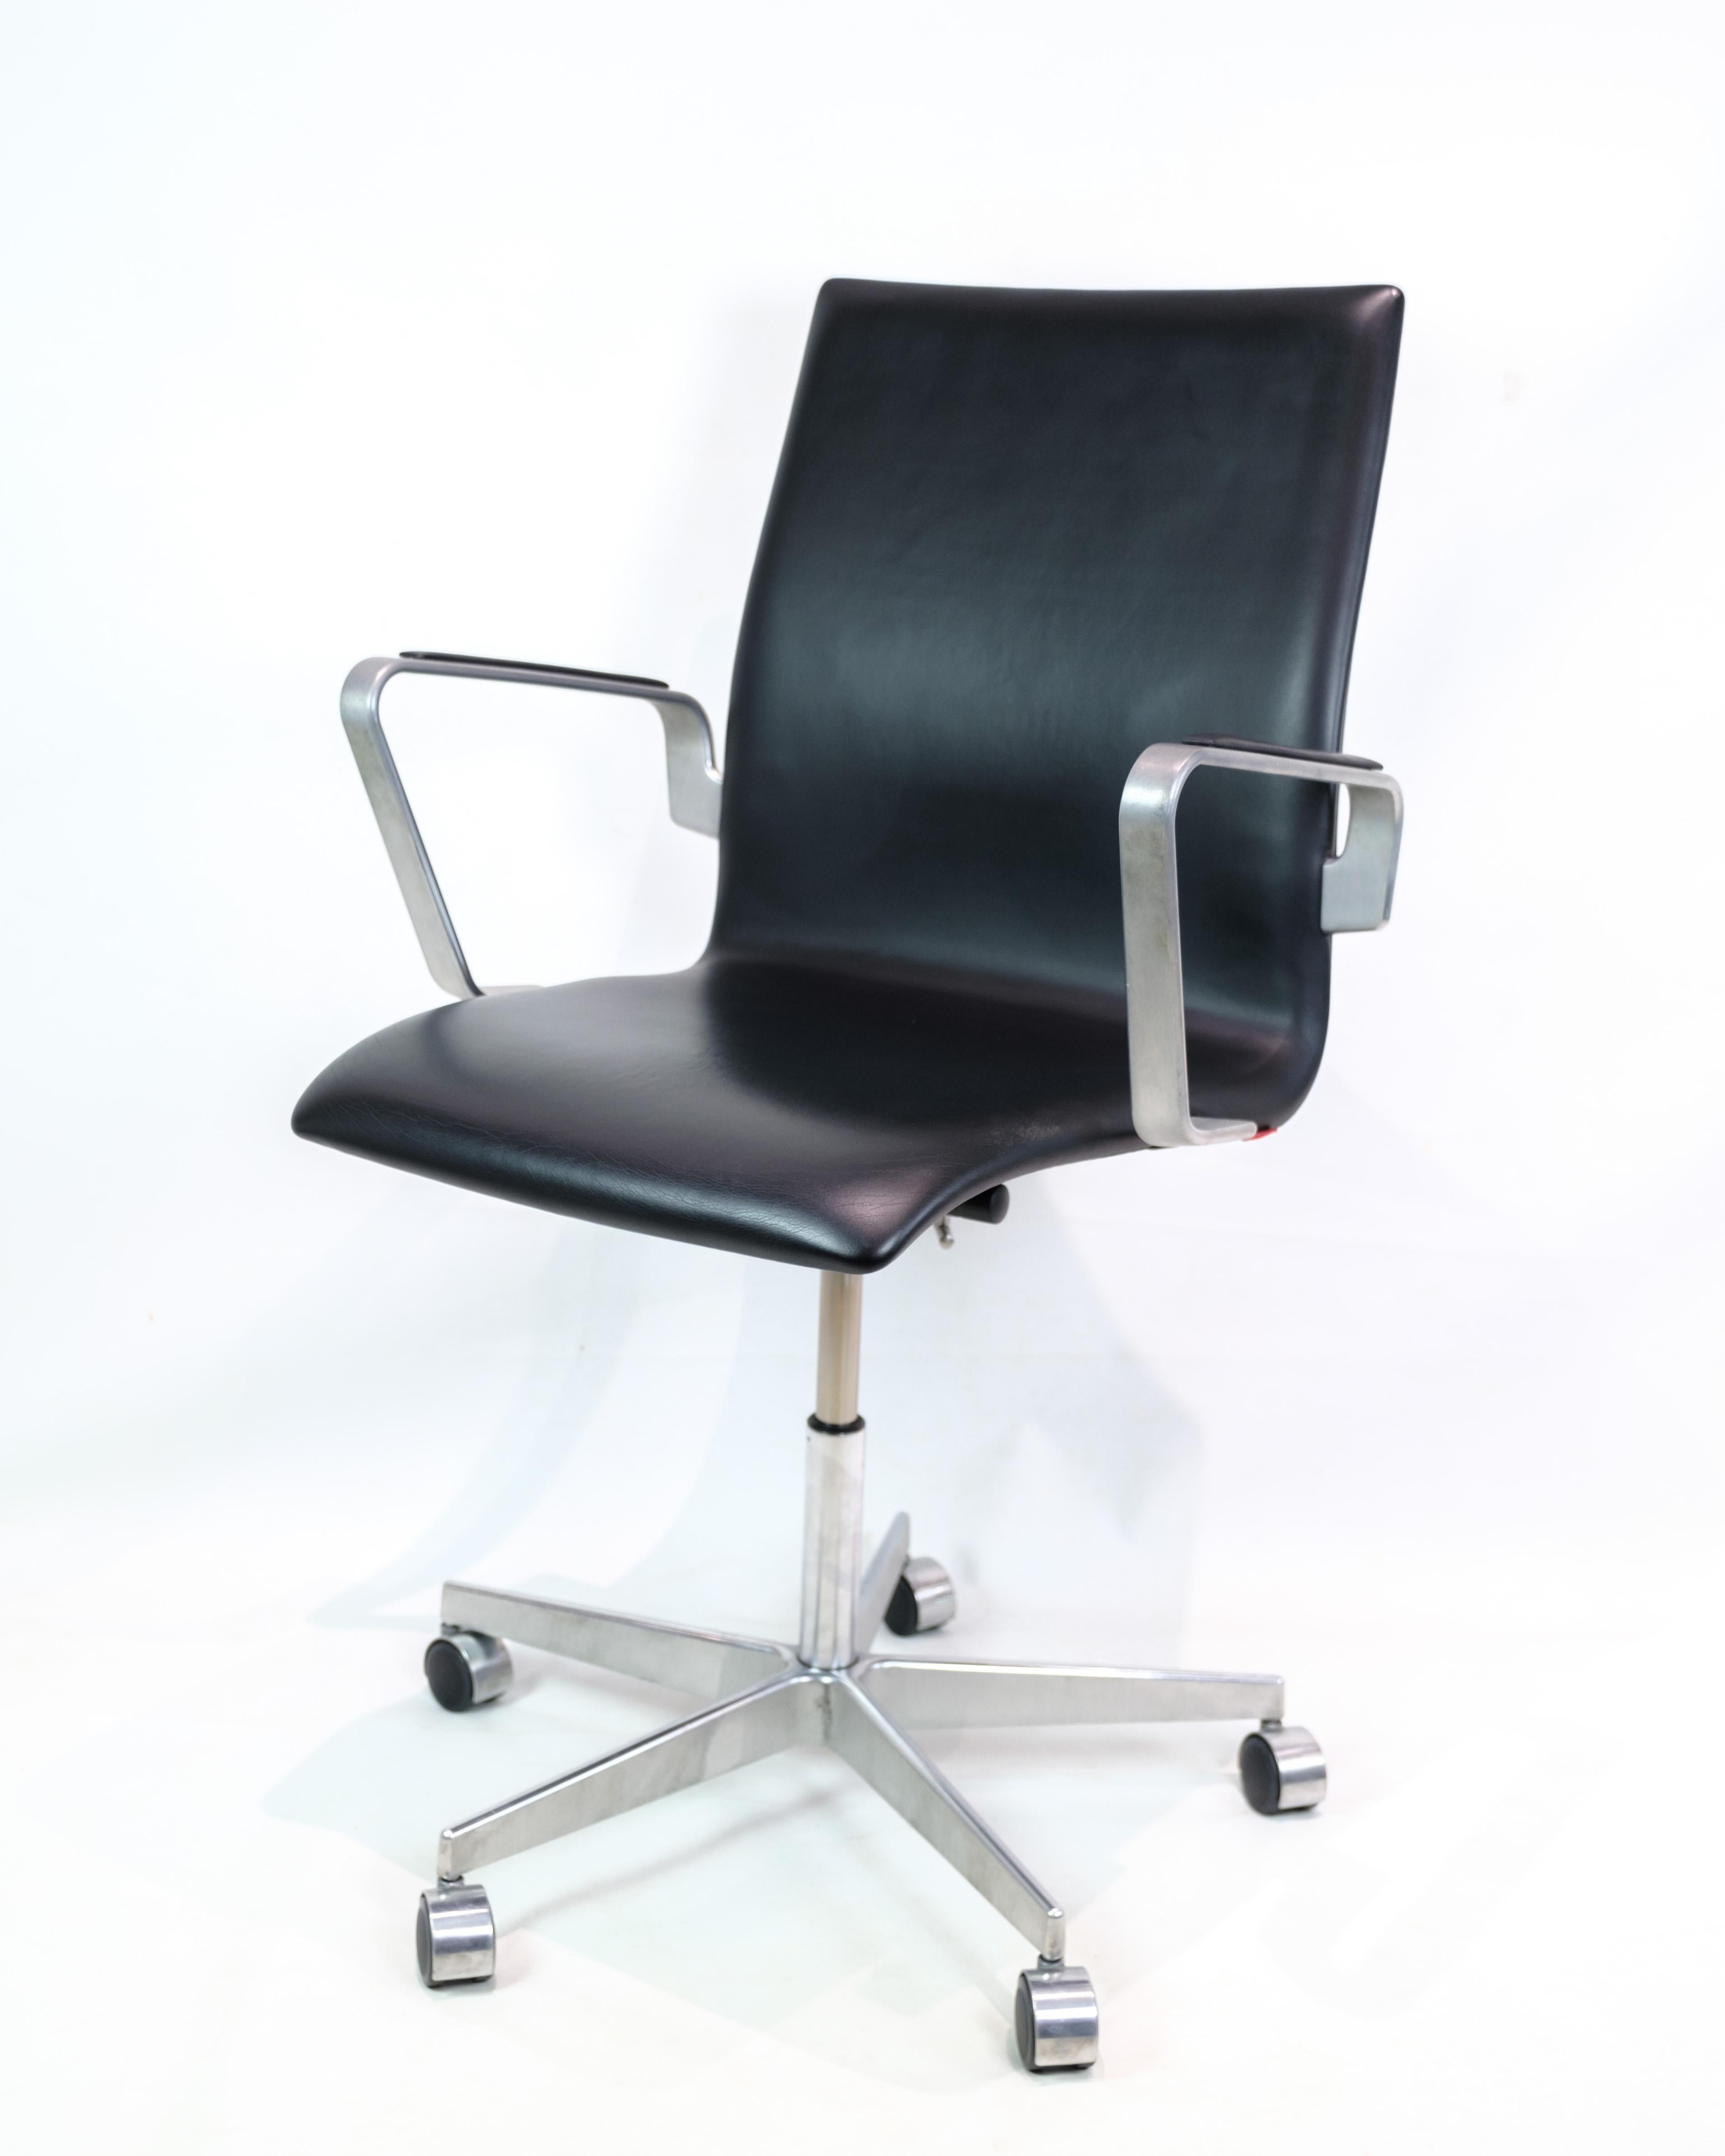 This Desk chair is a classic representation of Danish design heritage from the 1980s. The model, known as 3271W Oxford, was designed by the famous Arne Jacobsen and produced by Fritz Hansen. The chair has an elegant and timeless aesthetic with a